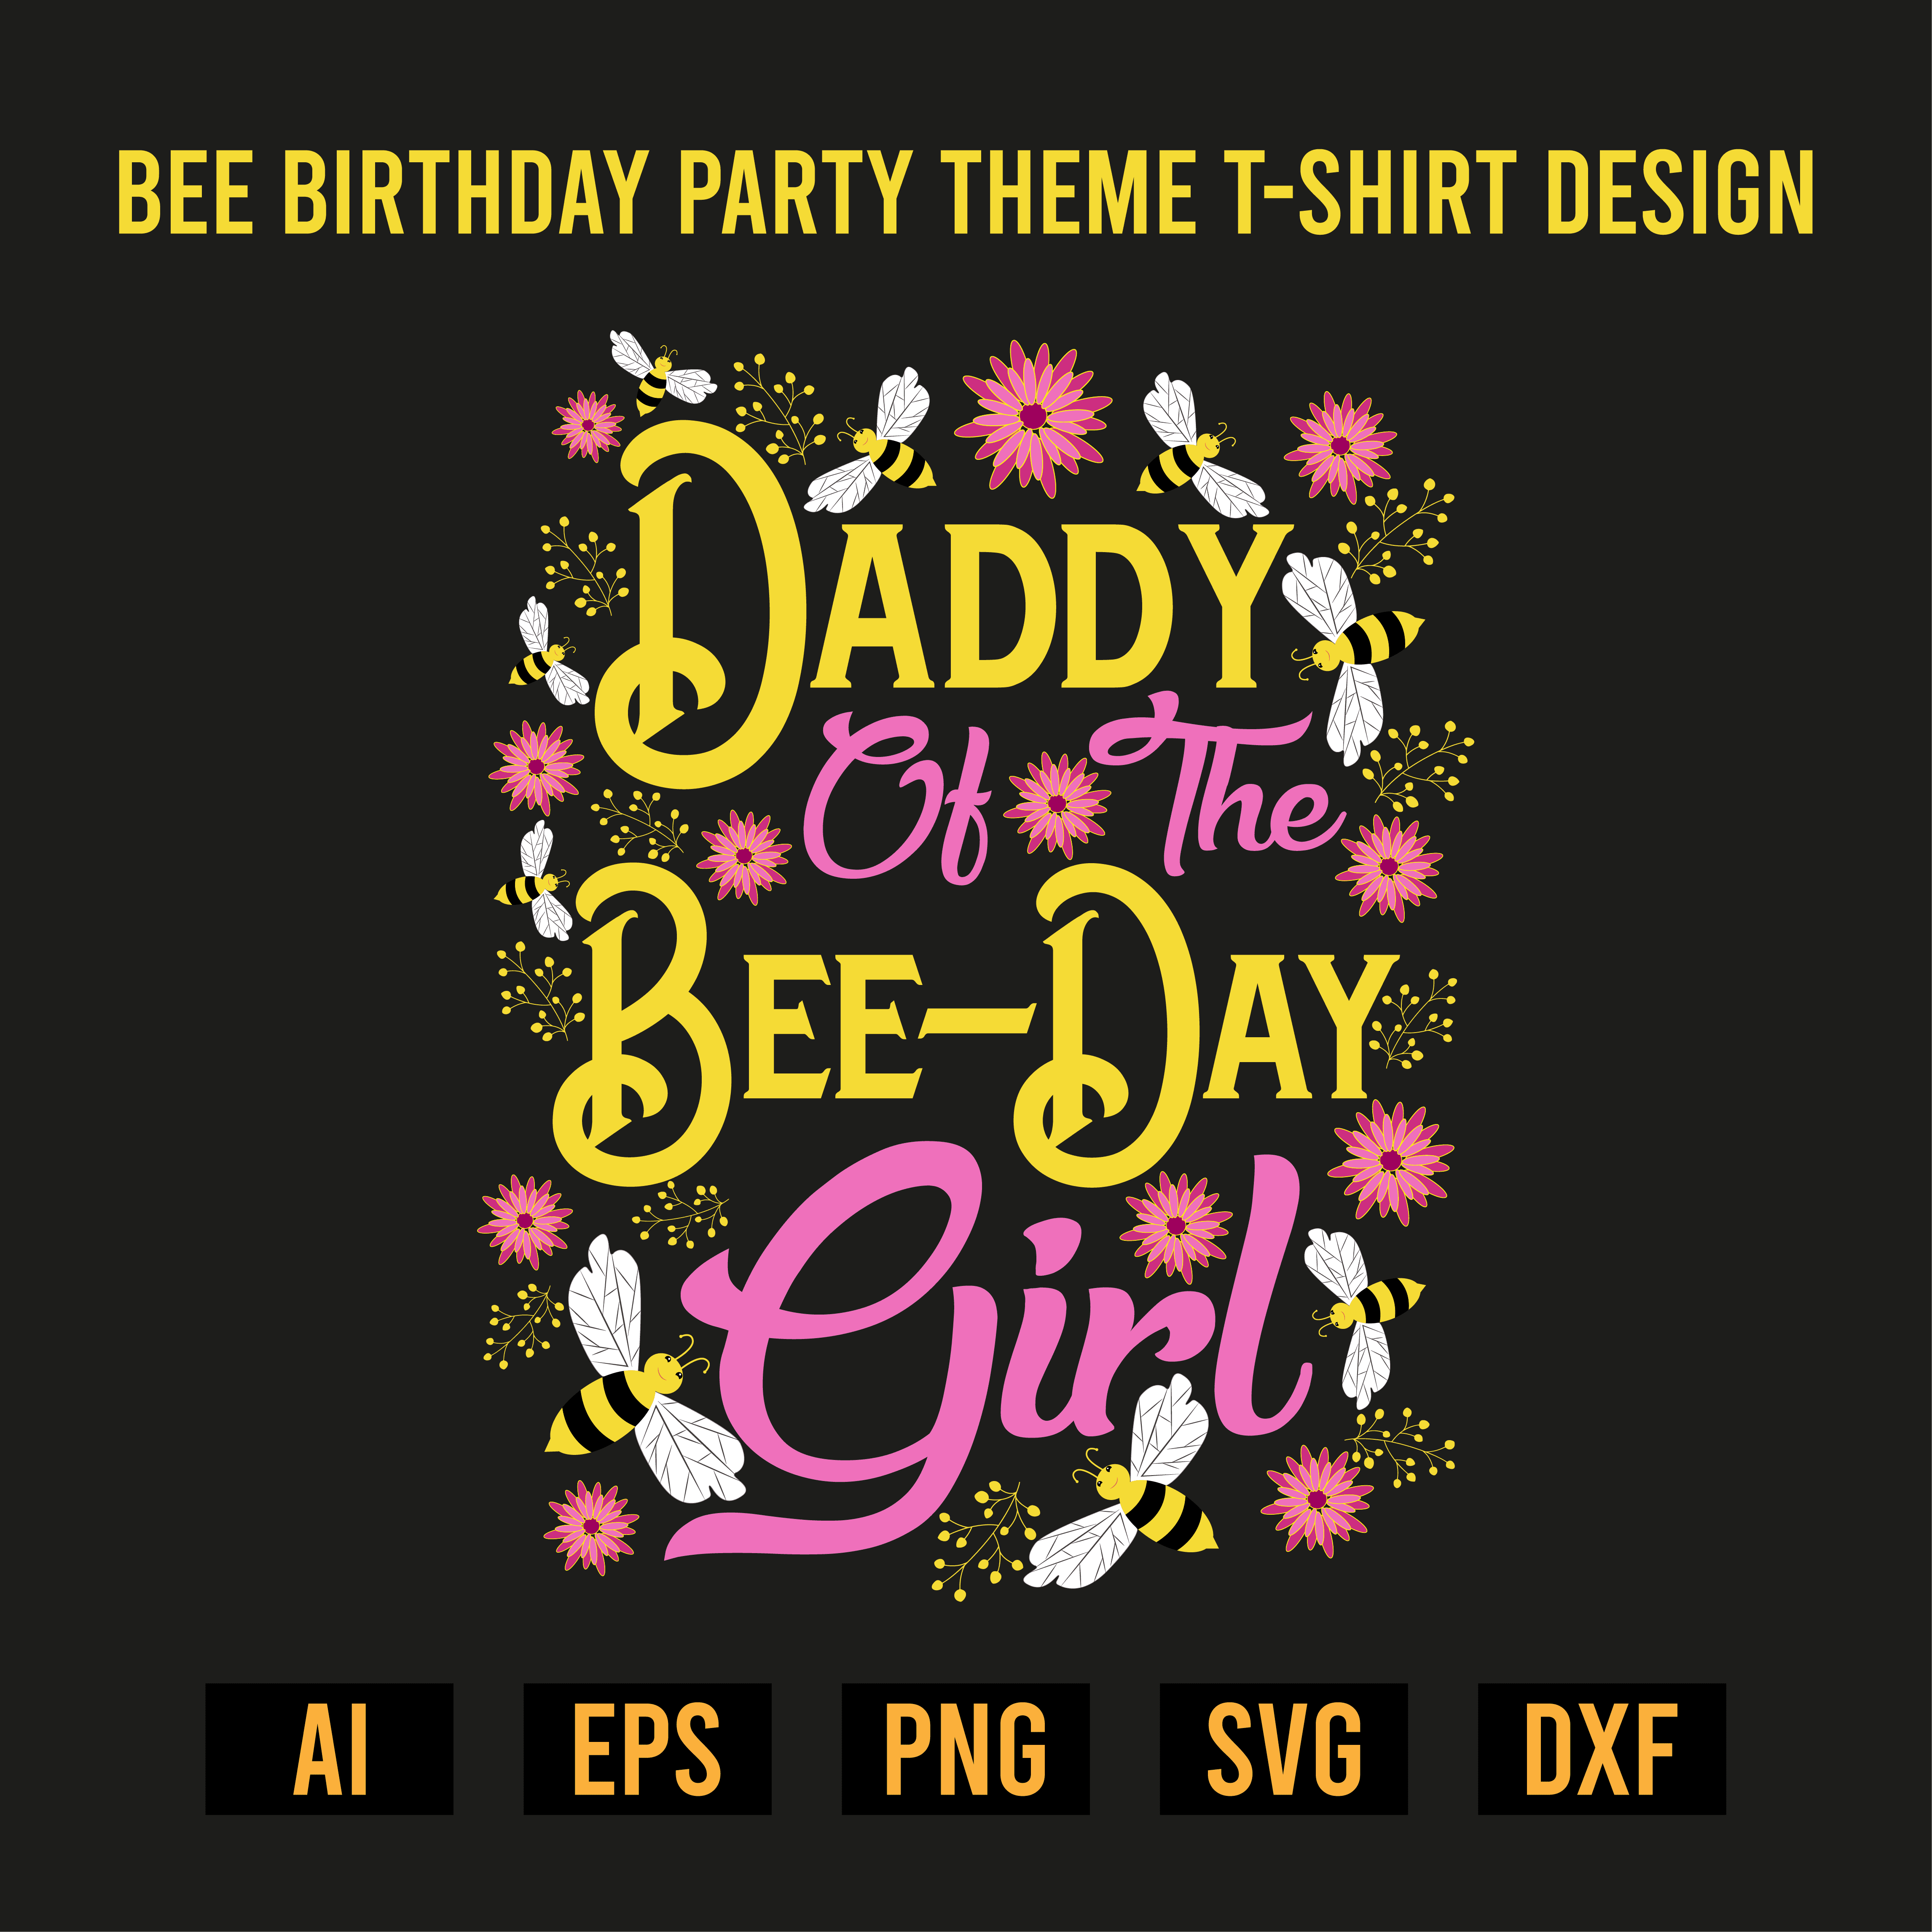 Bee Birthday Party Theme T- Shirt Design cover image.